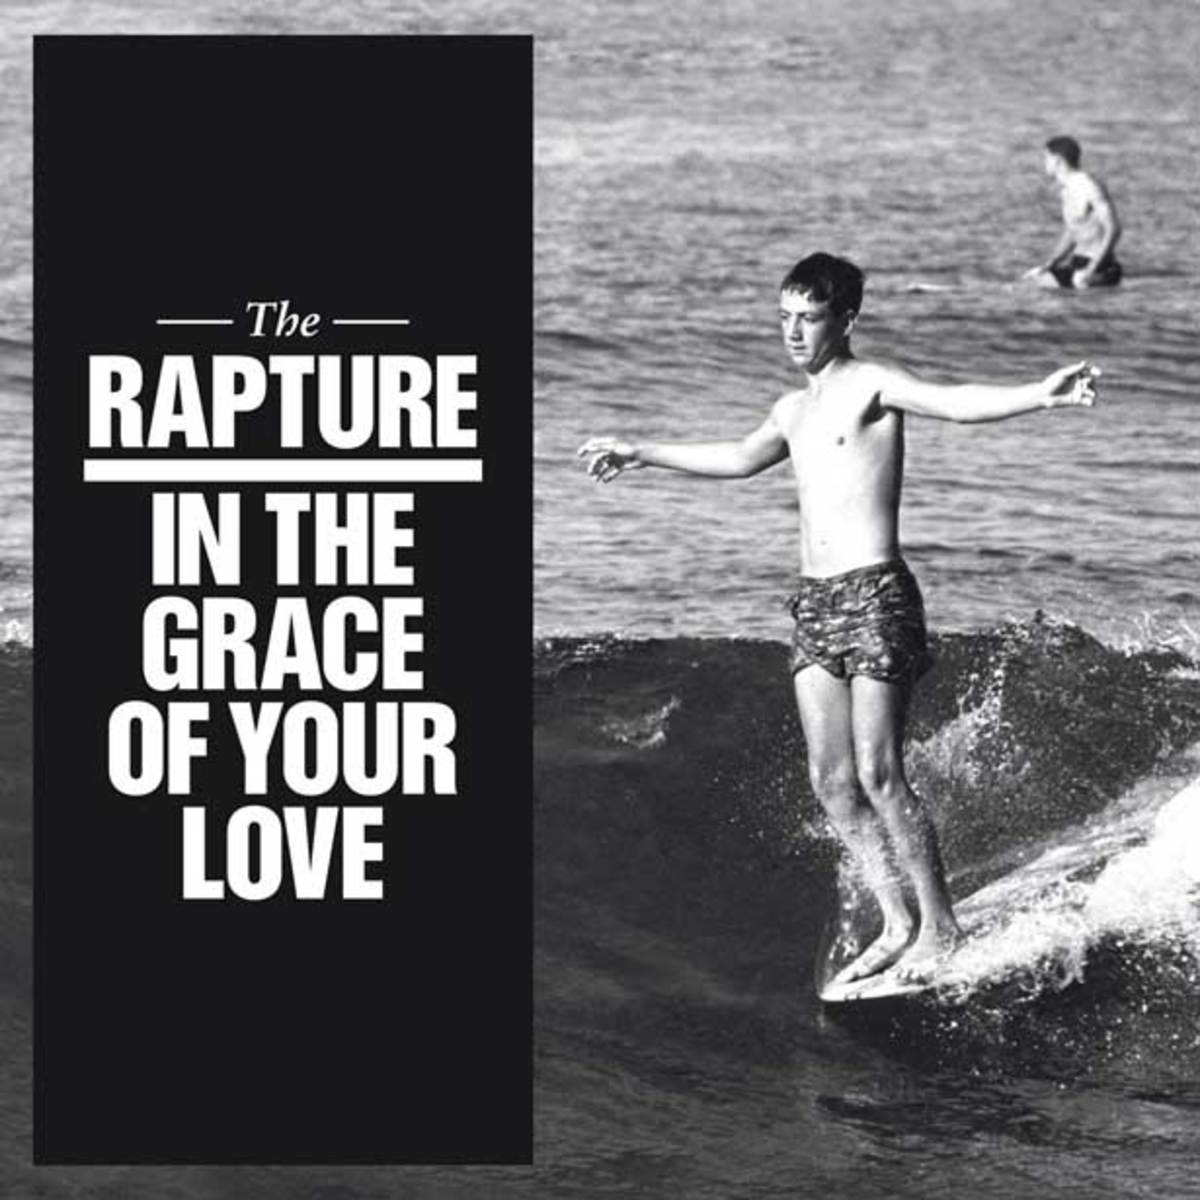 The-Rapture